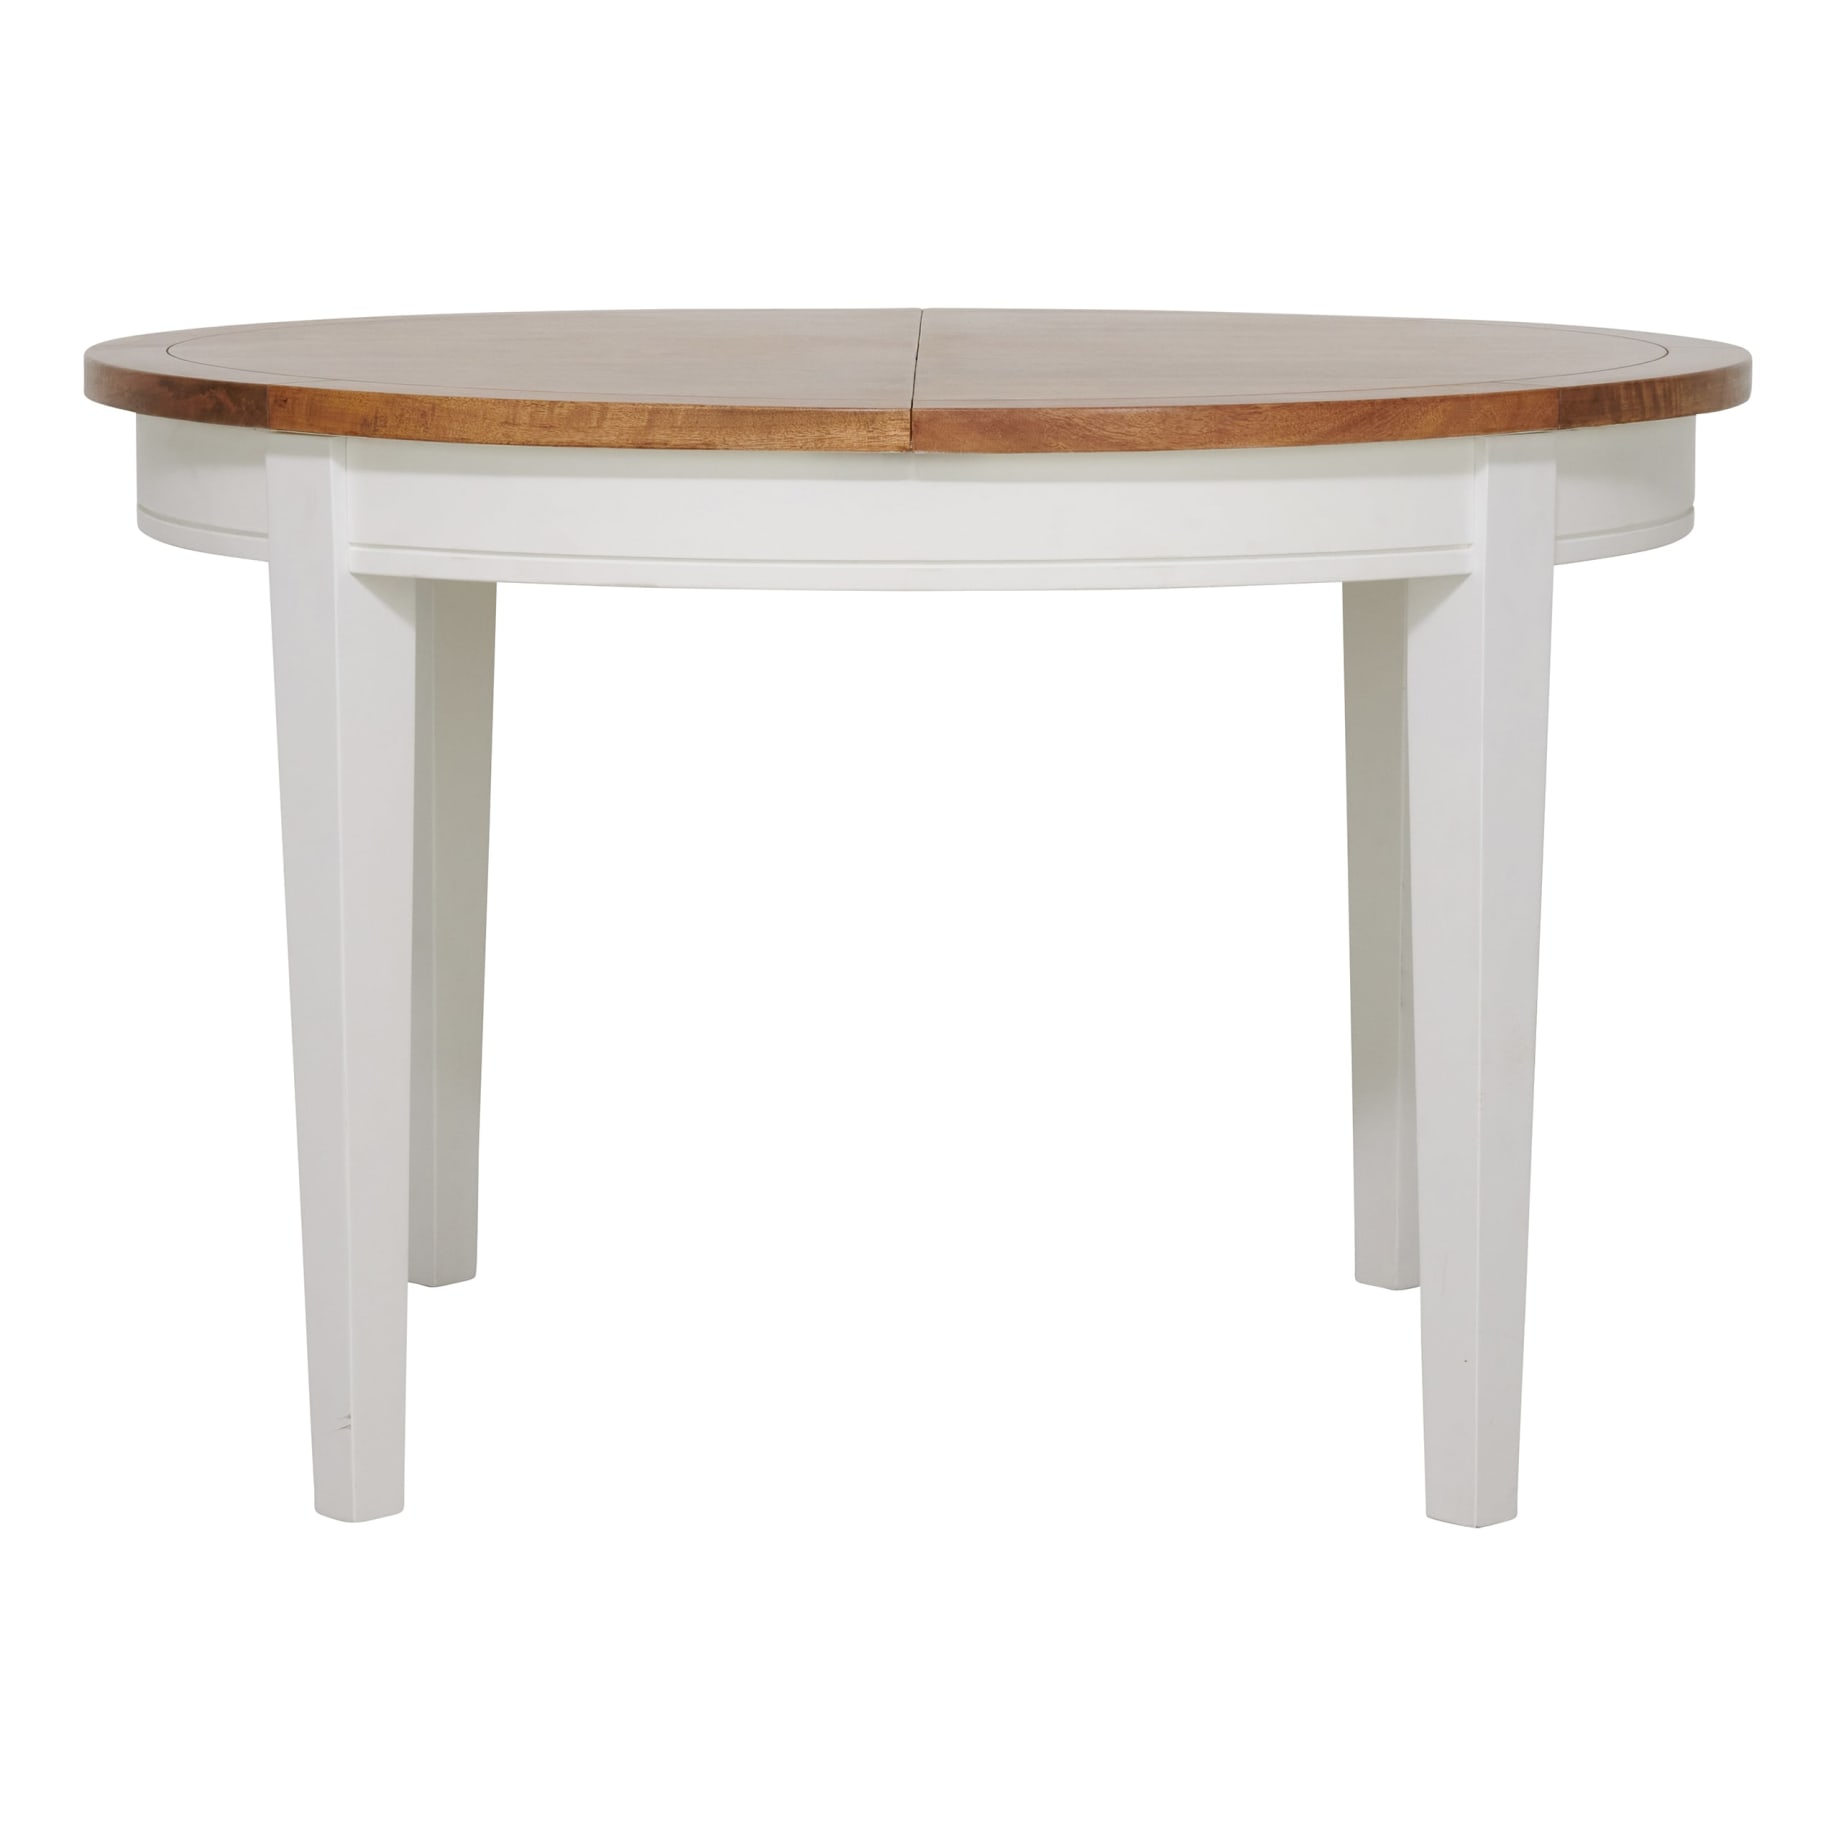 Mango Creek Rnd Ext Table 120-170cm in White/Clear